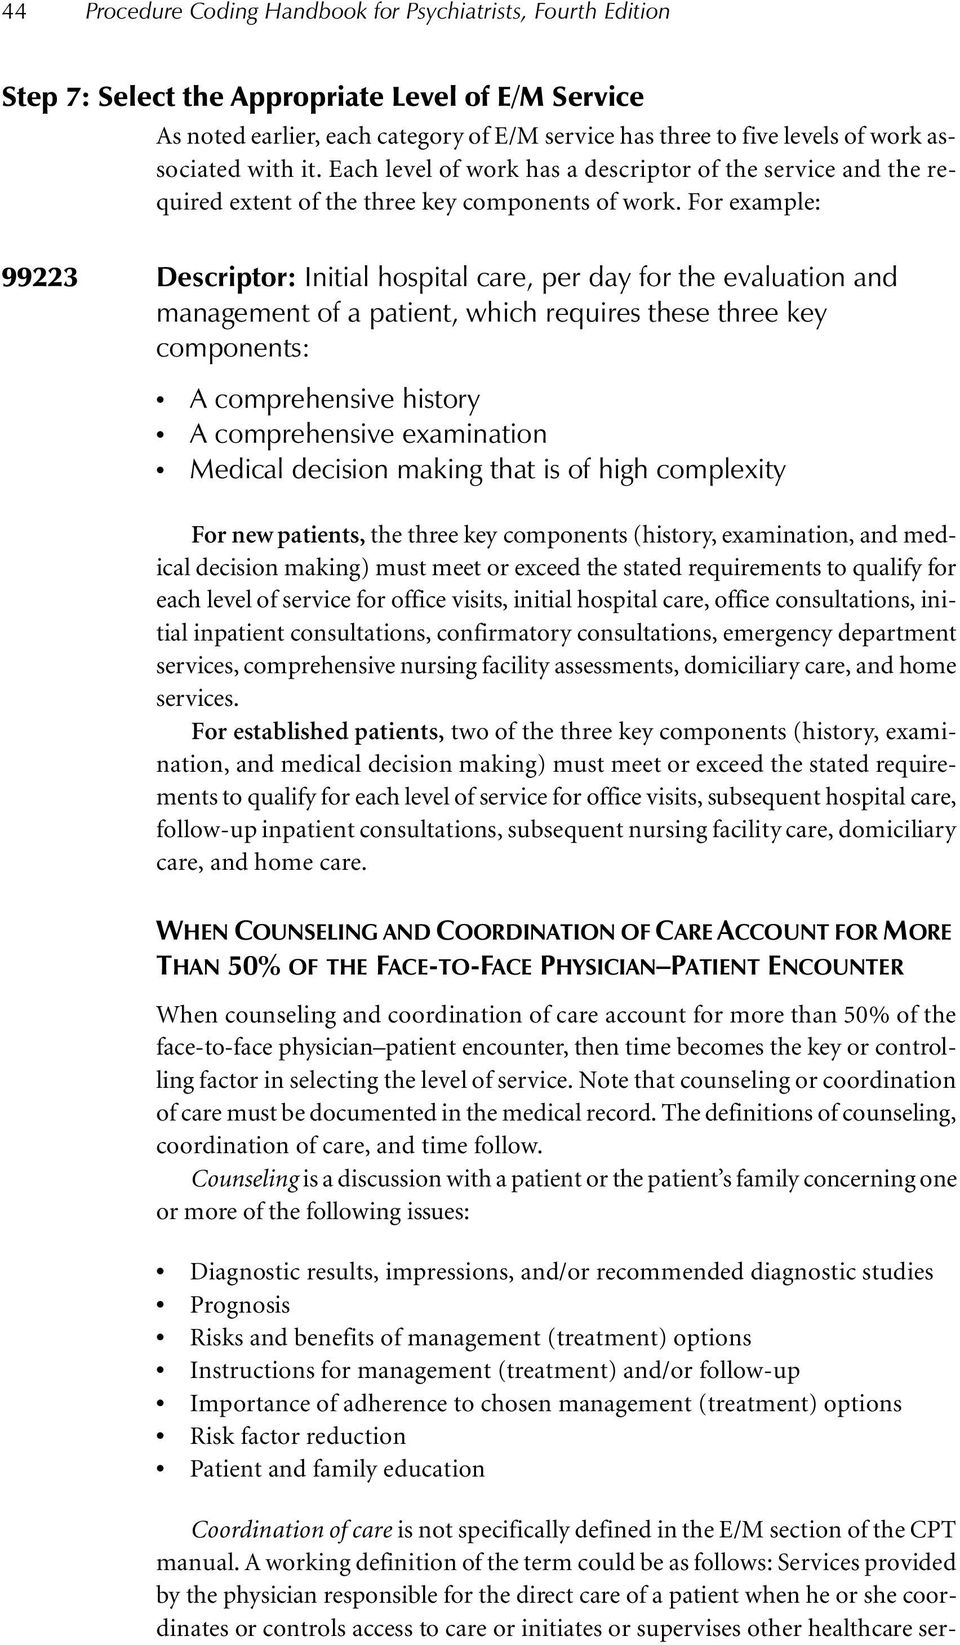 For example: 99223 Descriptor: Initial hospital care, per day for the evaluation and management of a patient, which requires these three key components: A comprehensive history A comprehensive